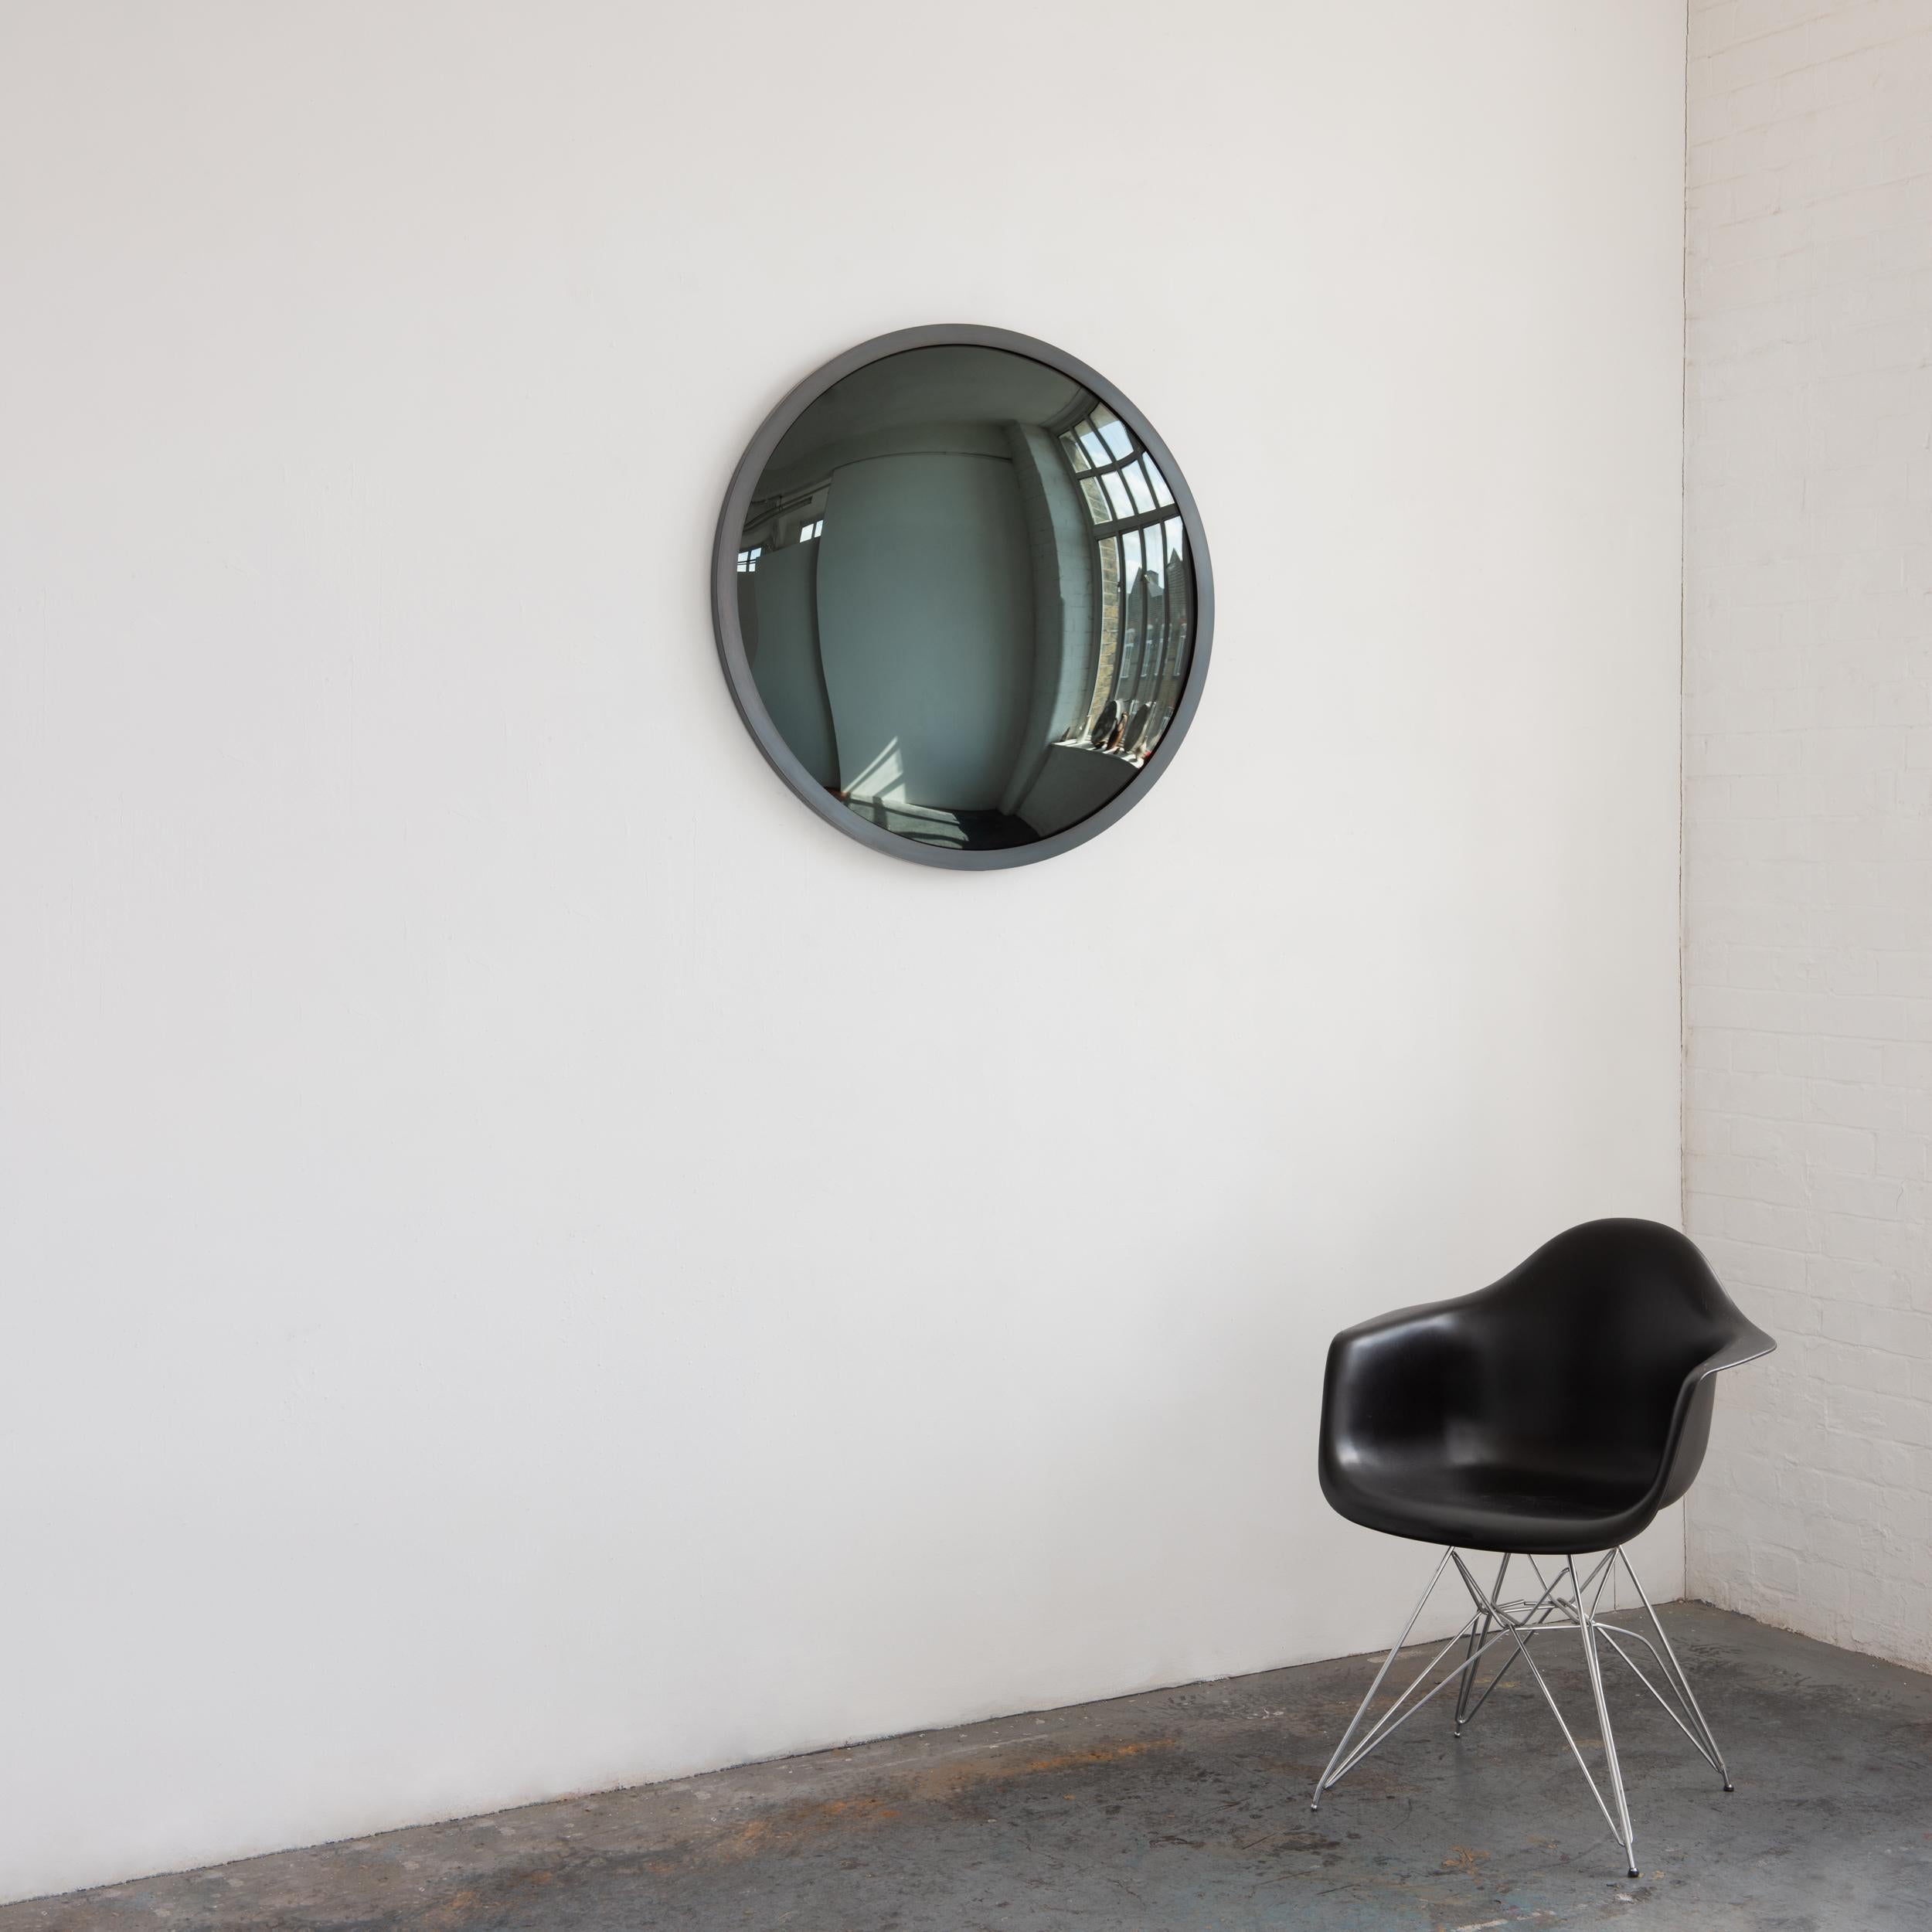 In Stock Orbis Round Black Tinted Convex Mirror, Blackened Metal Frame, Large In New Condition For Sale In London, GB